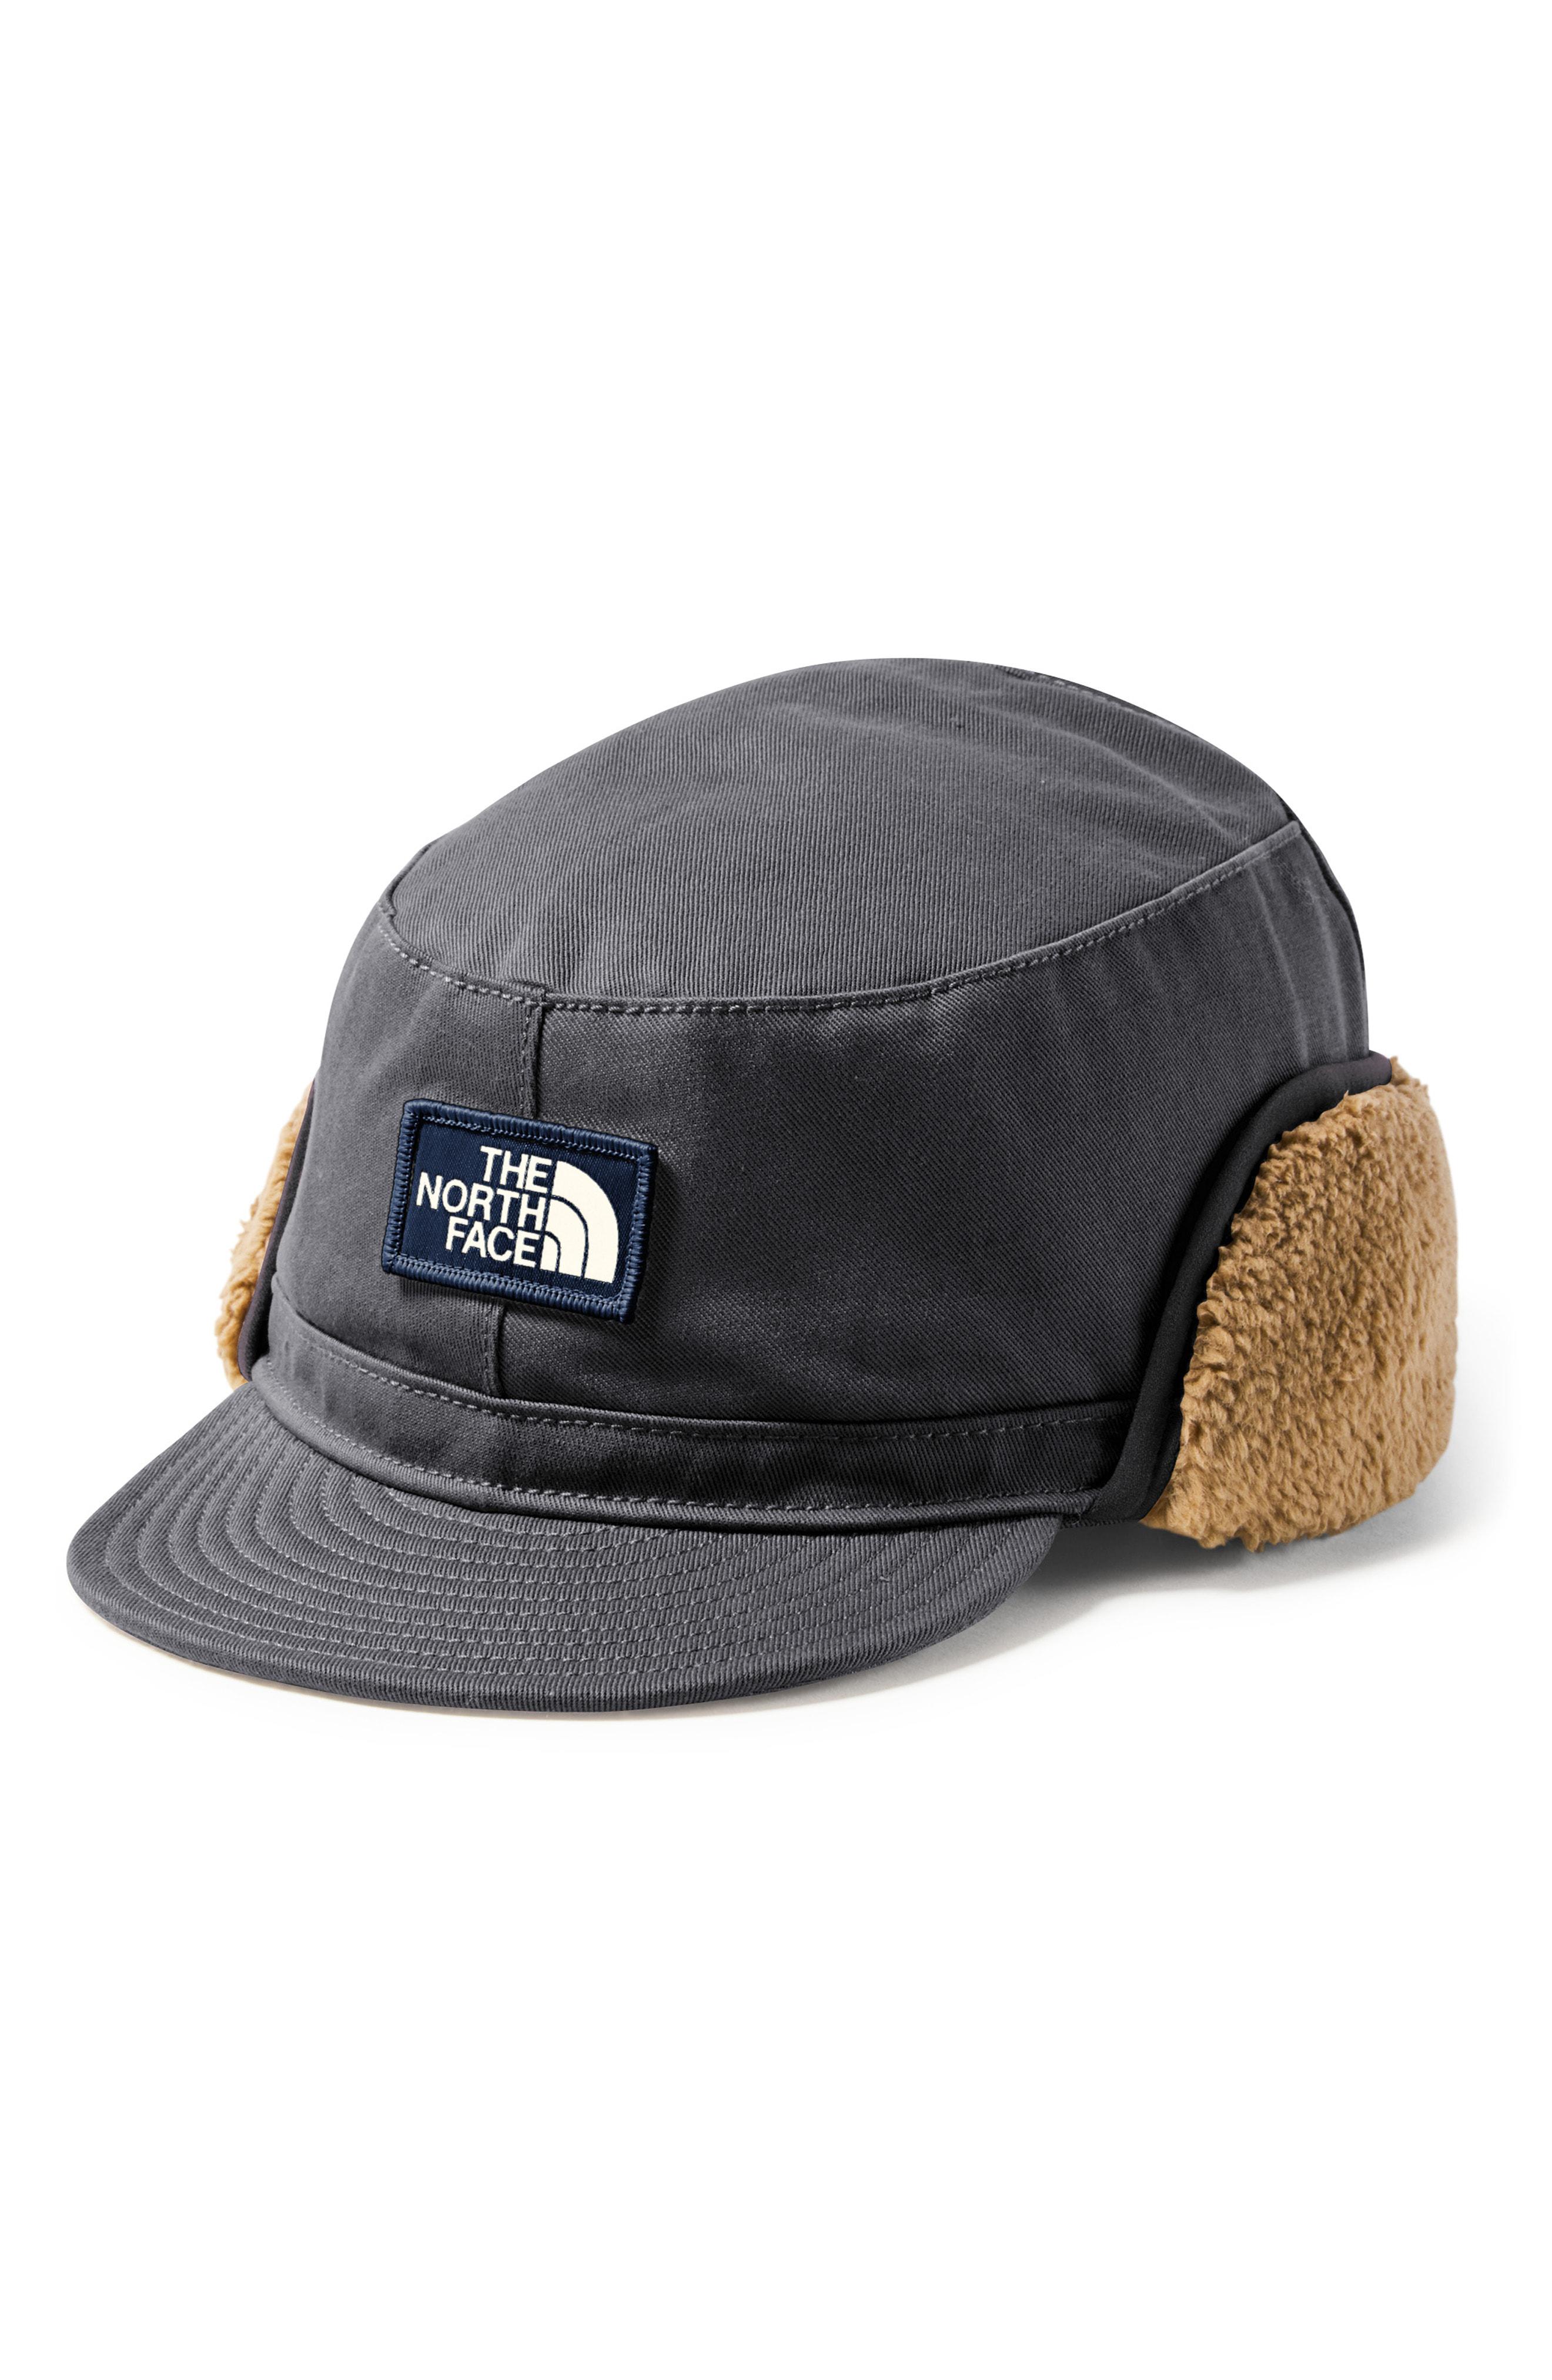 north face hat with ear flaps